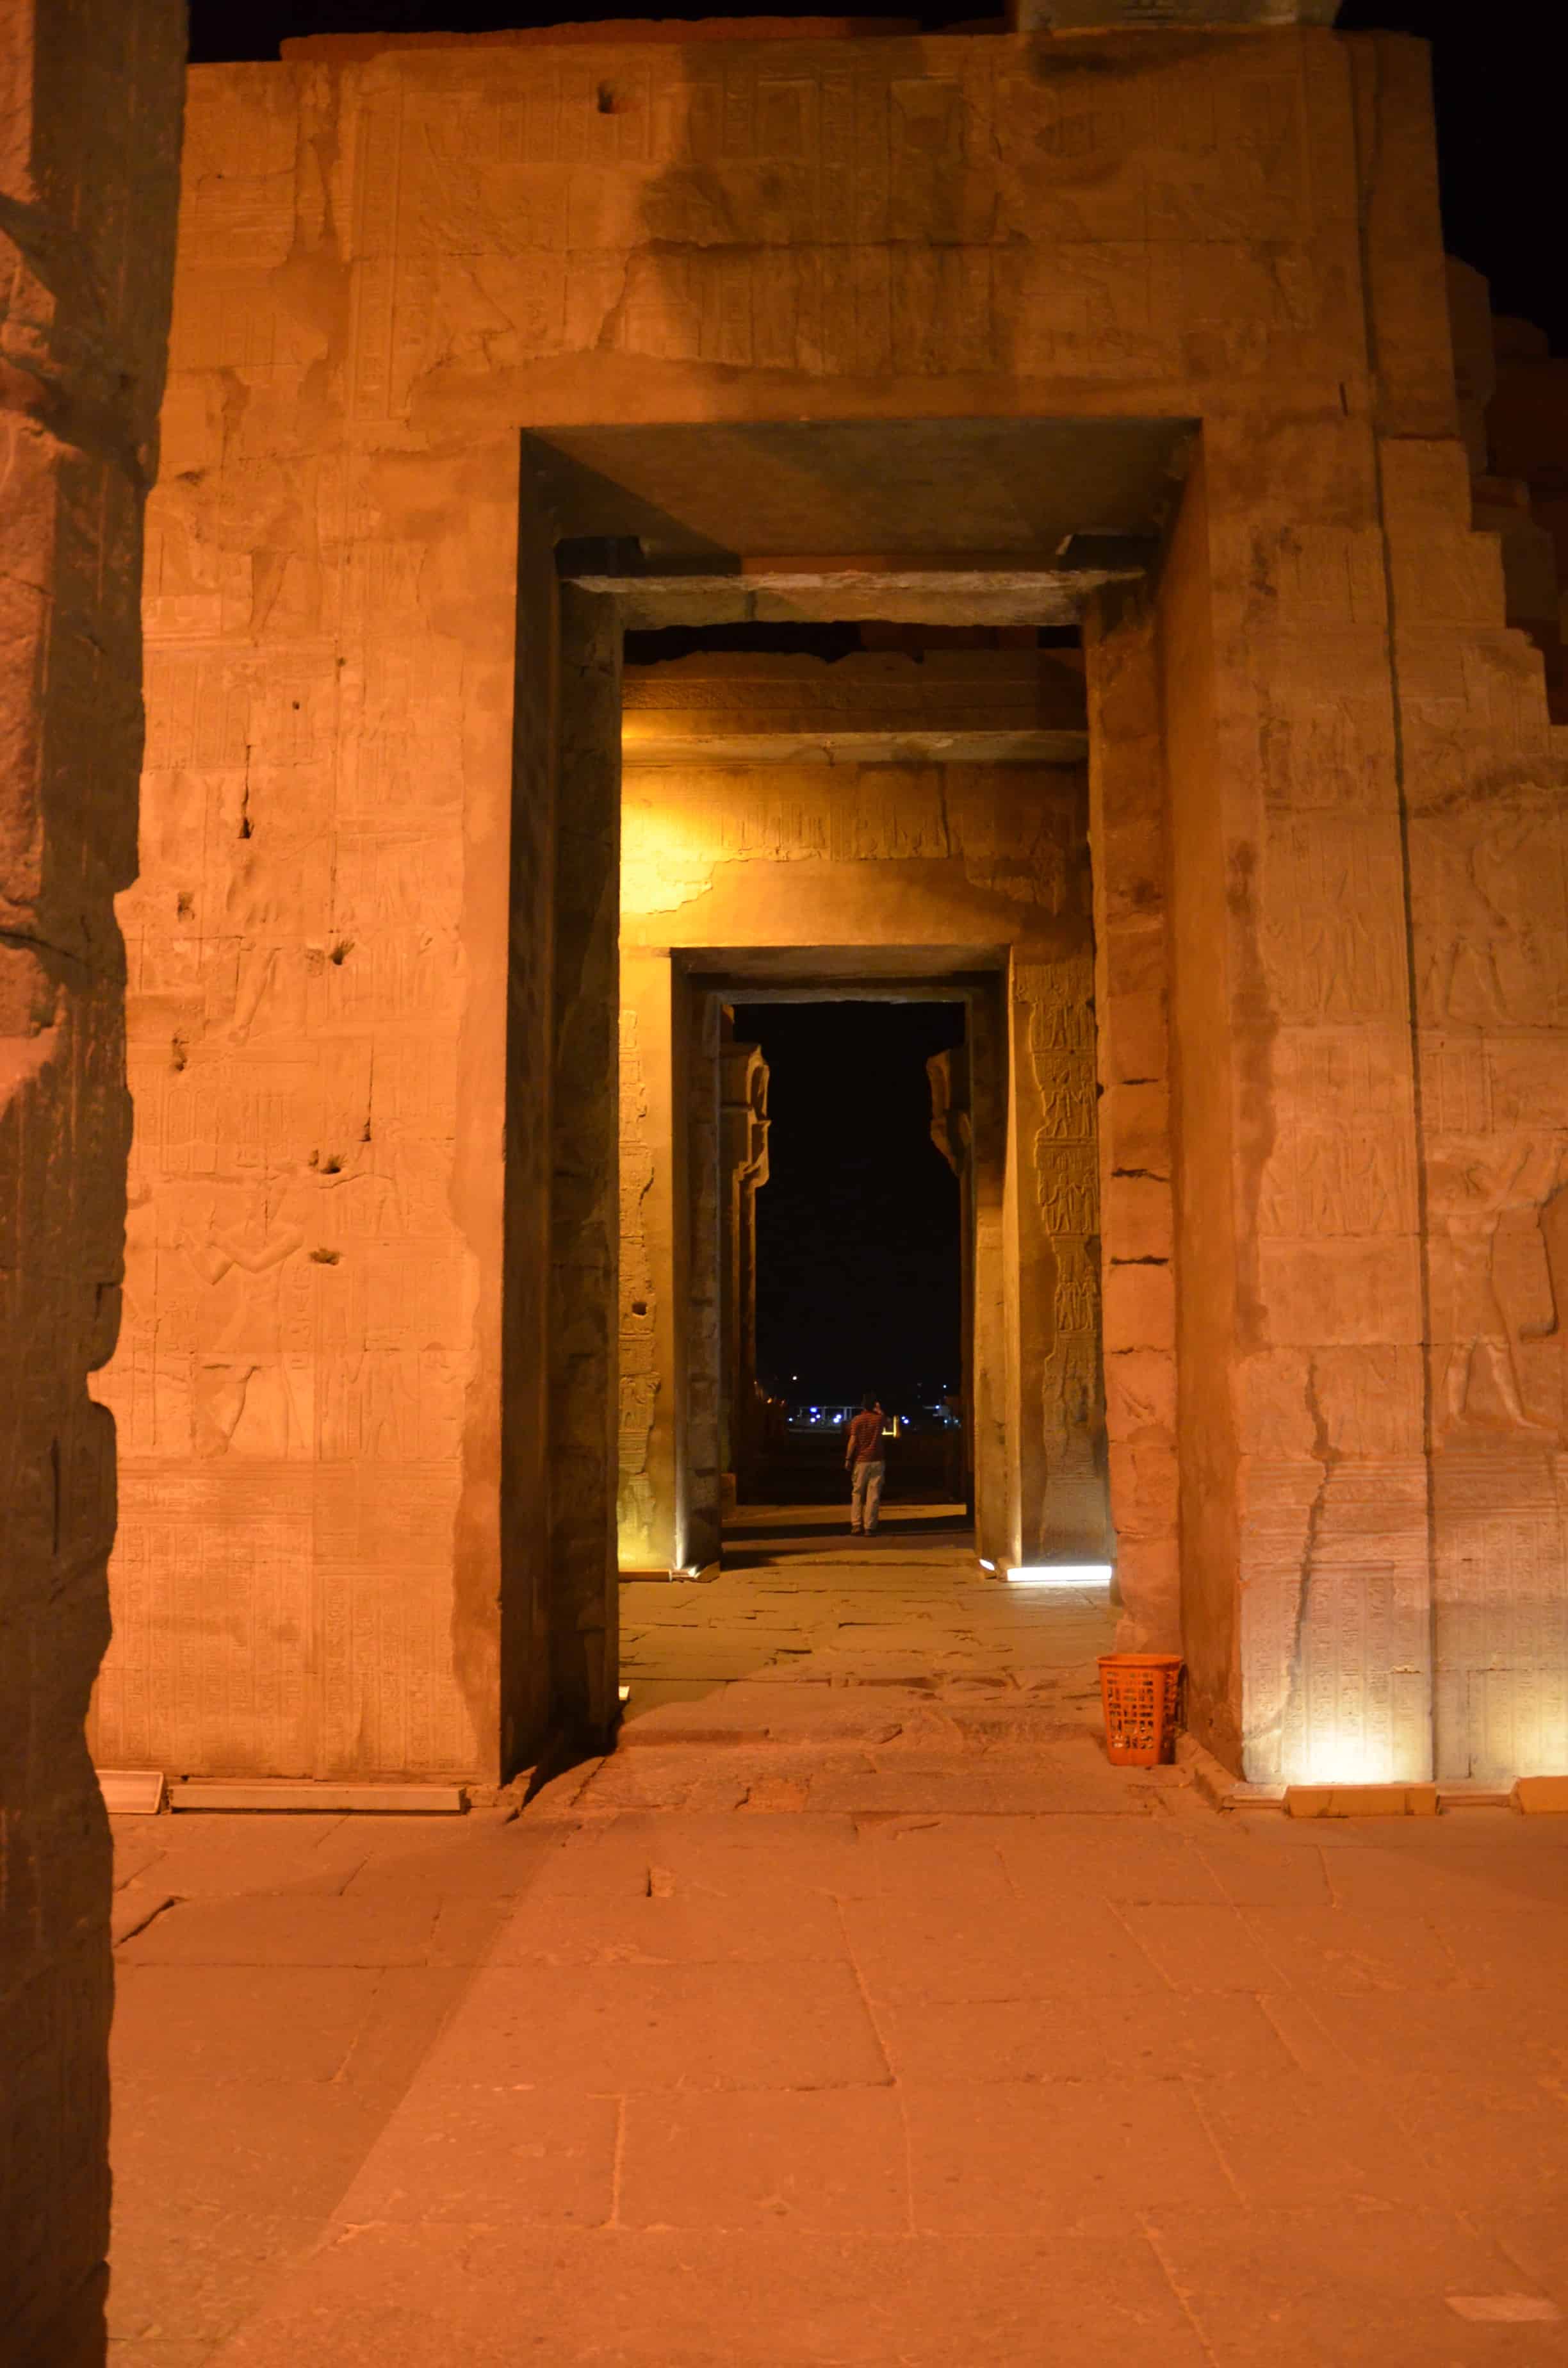 Doors in the Temple of Kom Ombo, Egypt